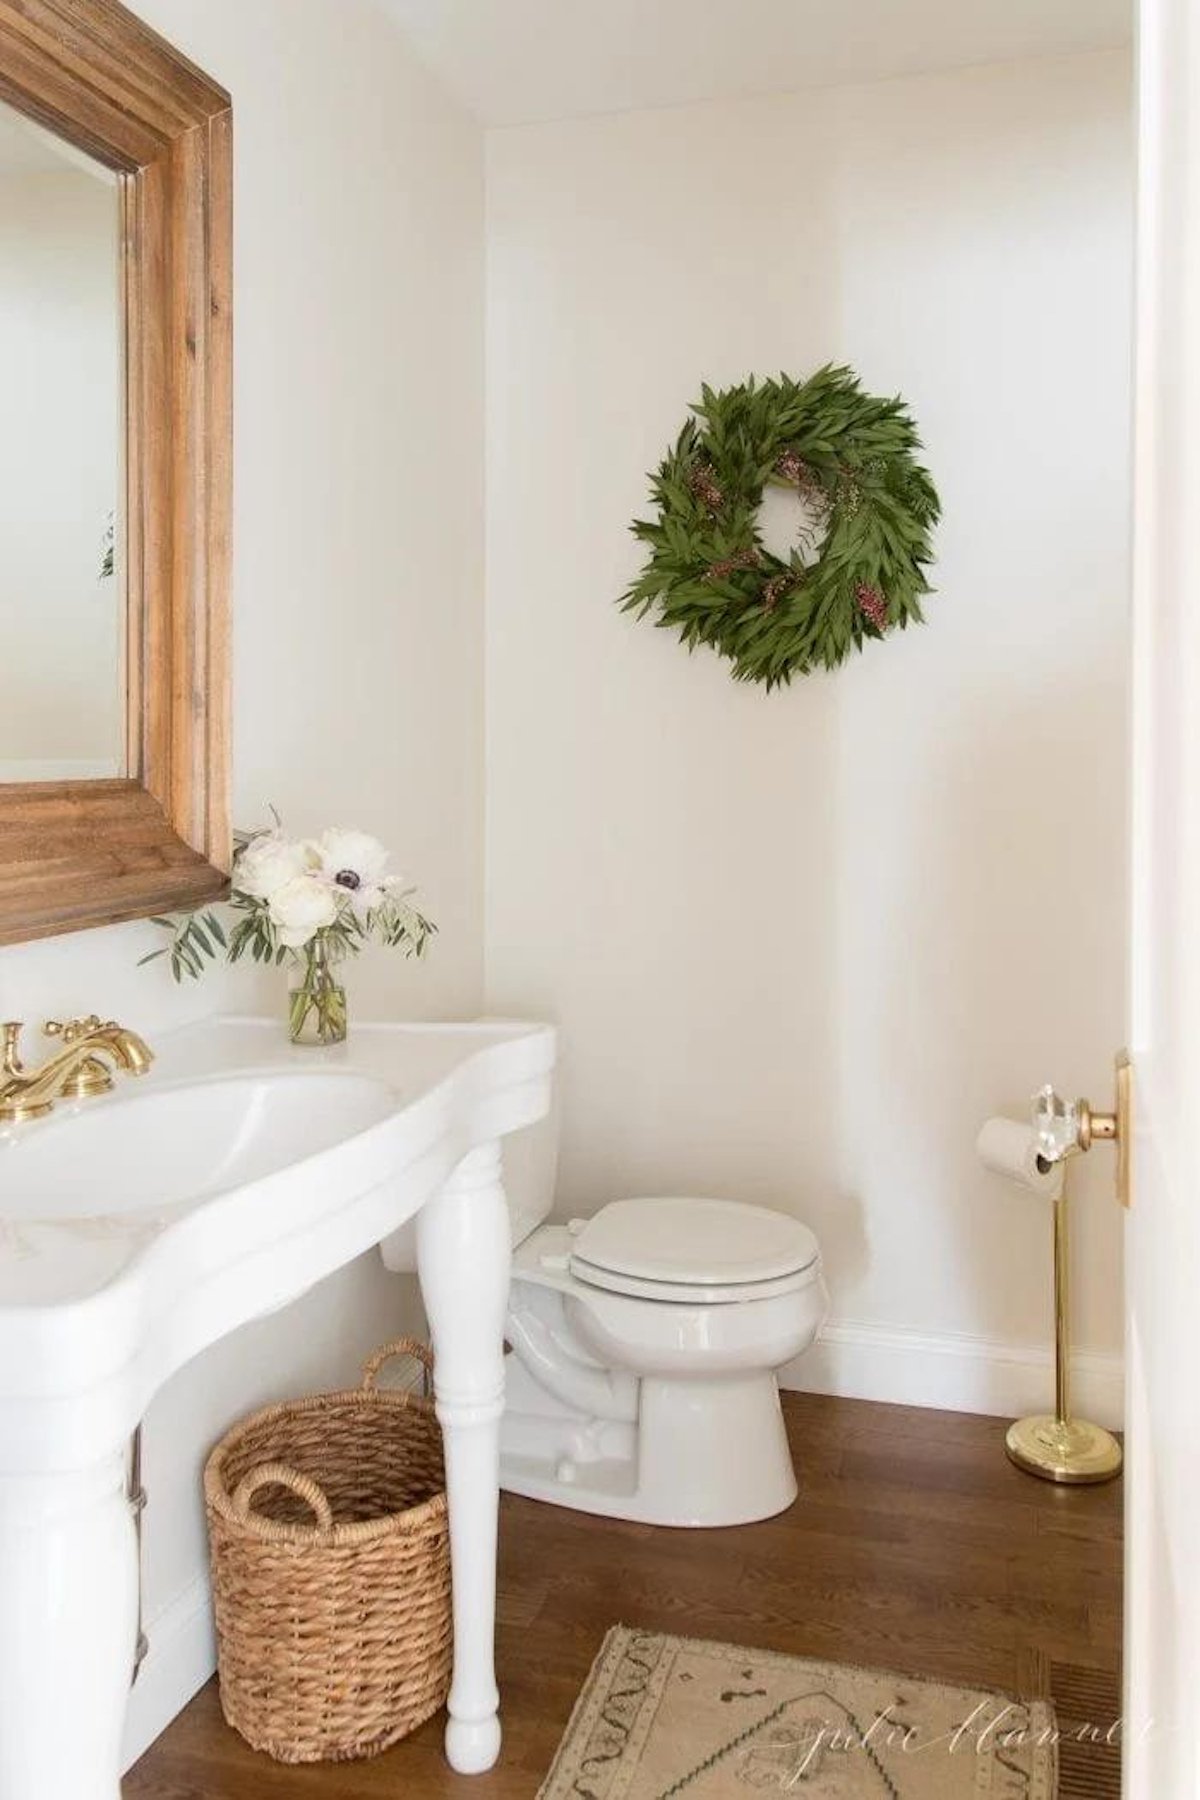 A white bathroom adorned with a festive wreath hanging on the wall, bringing a touch of Christmas cheer to your house.